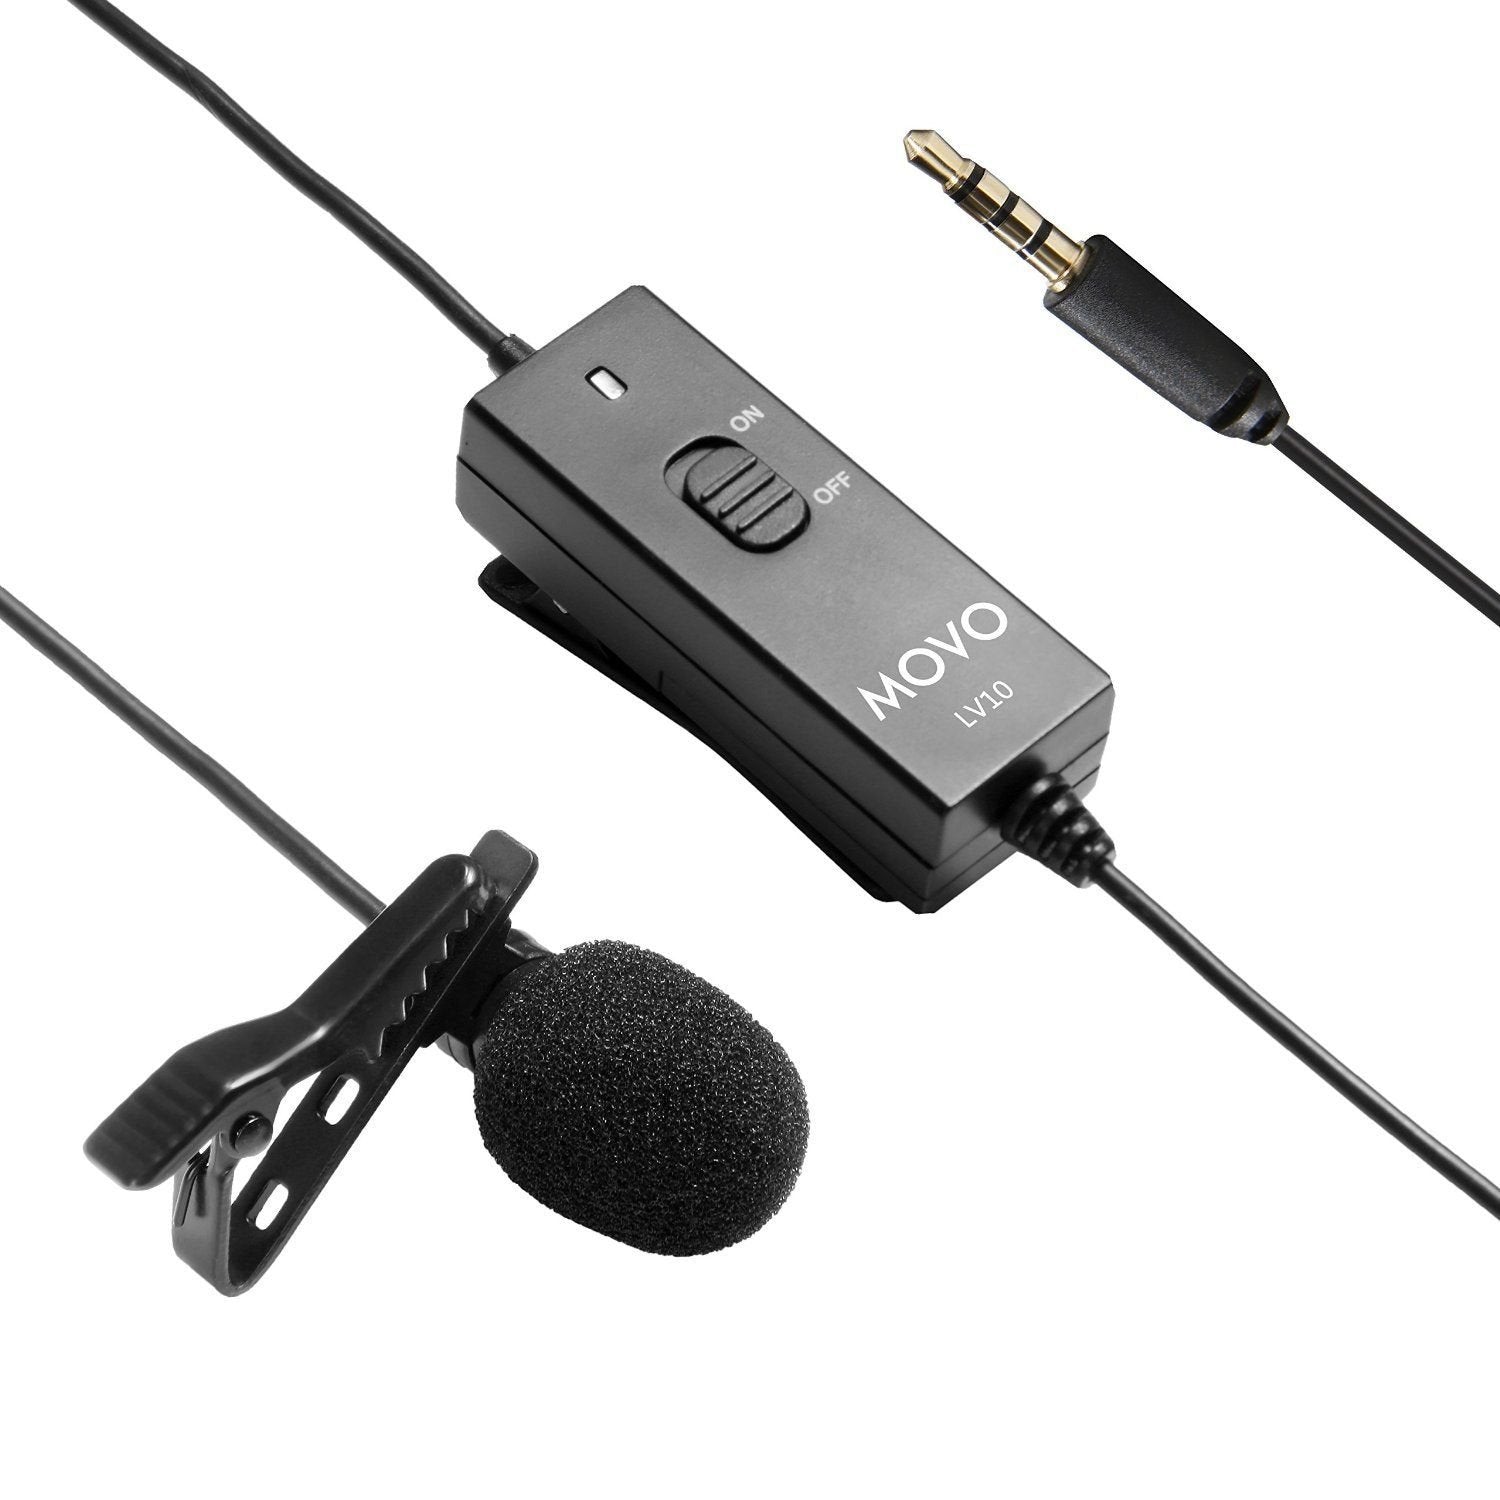 Movo LV10 Battery-Powered Lavalier Clip-on Omnidirectional Condenser TRRS Microphone for Apple iPhone, iPad, iPod and Samsung Galaxy Smartphones, Cameras, Camcorders, Recorders  - Very Good